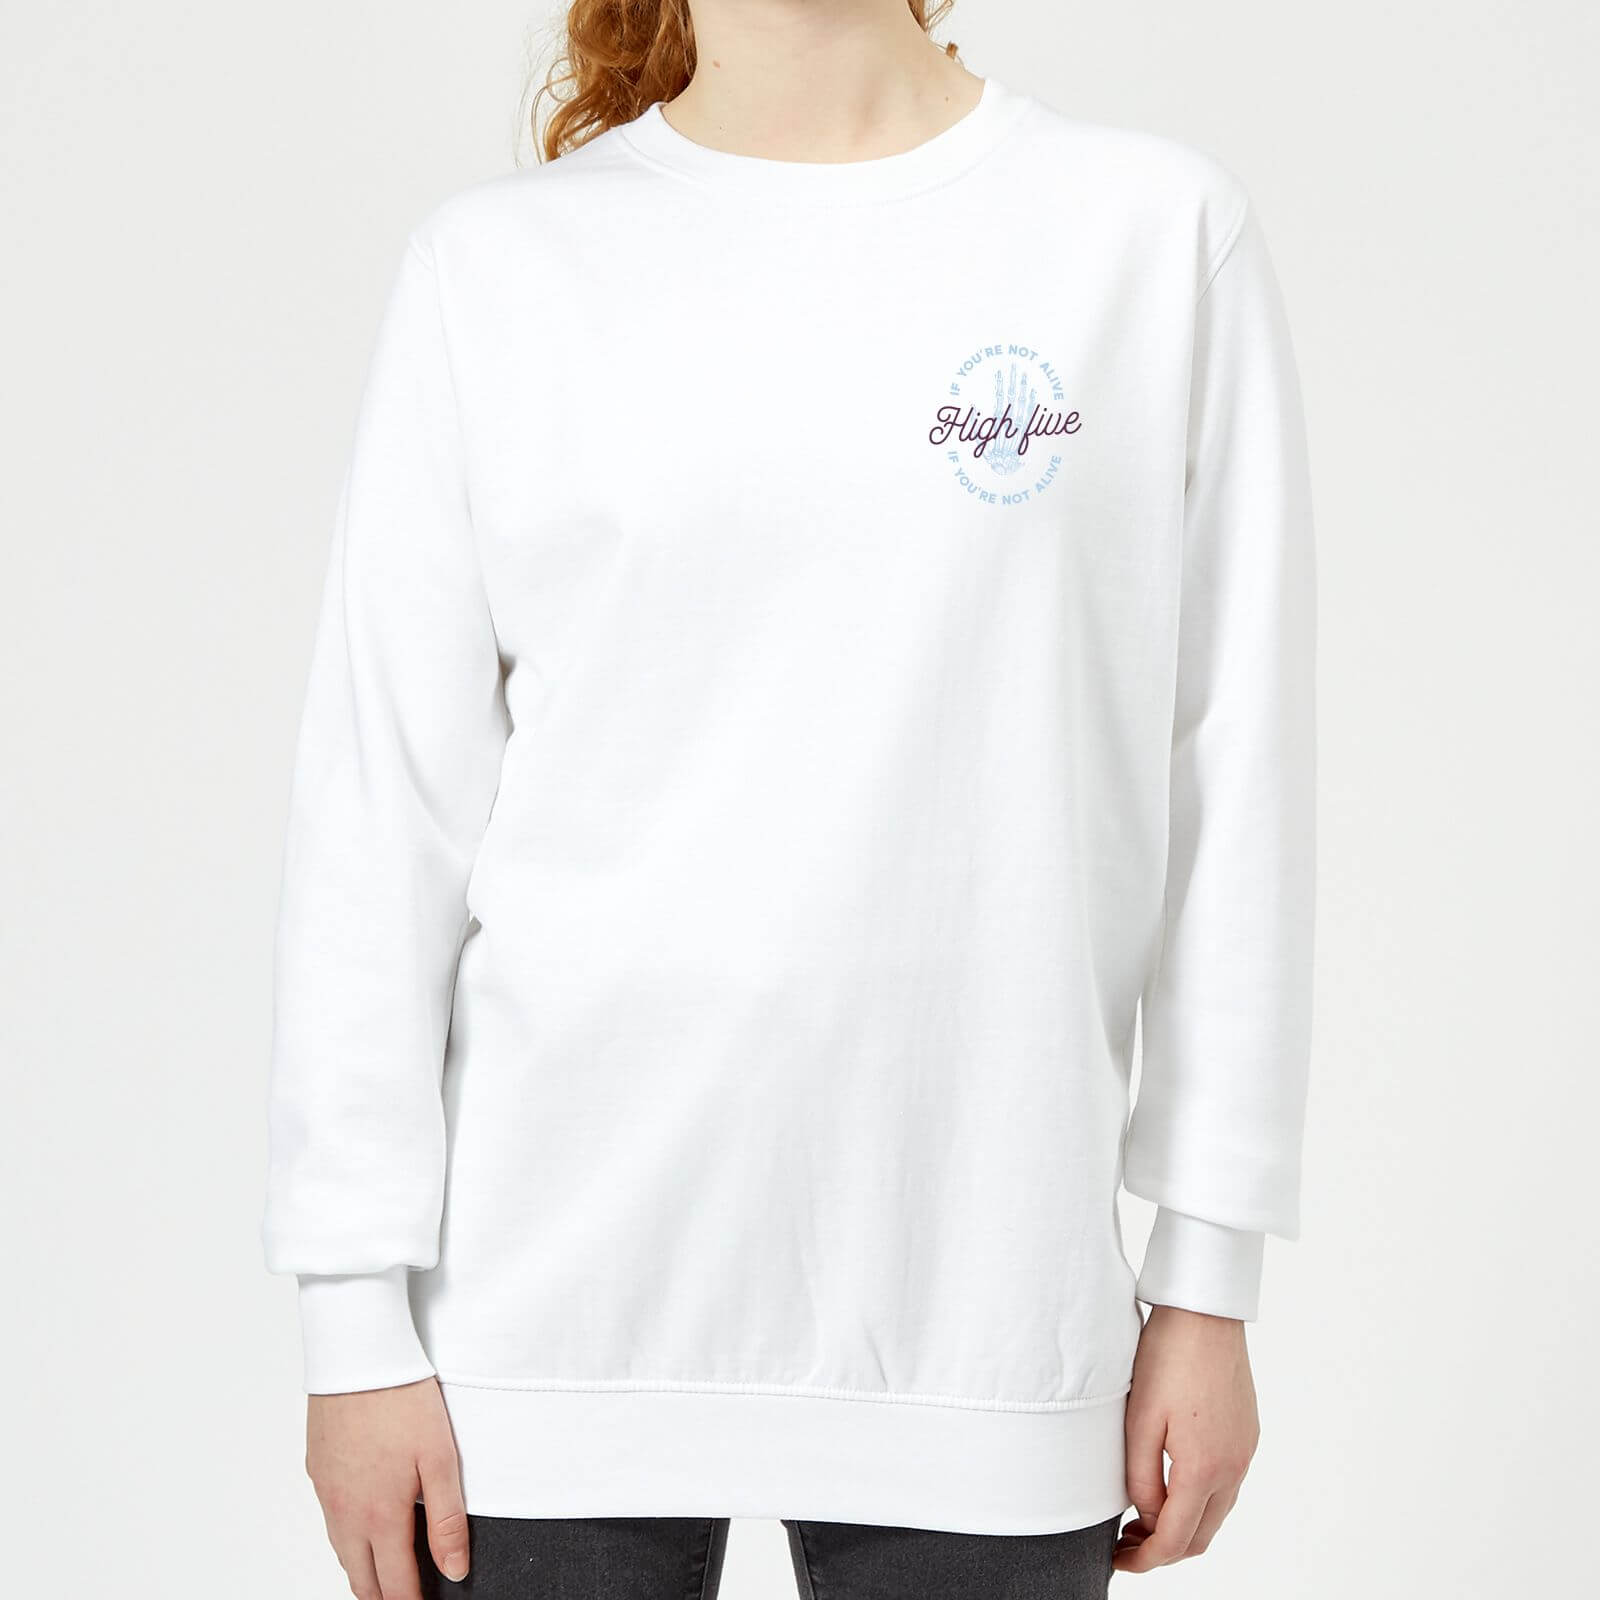 If Youre Not Alive, High Five Womens Sweatshirt - White - S - White